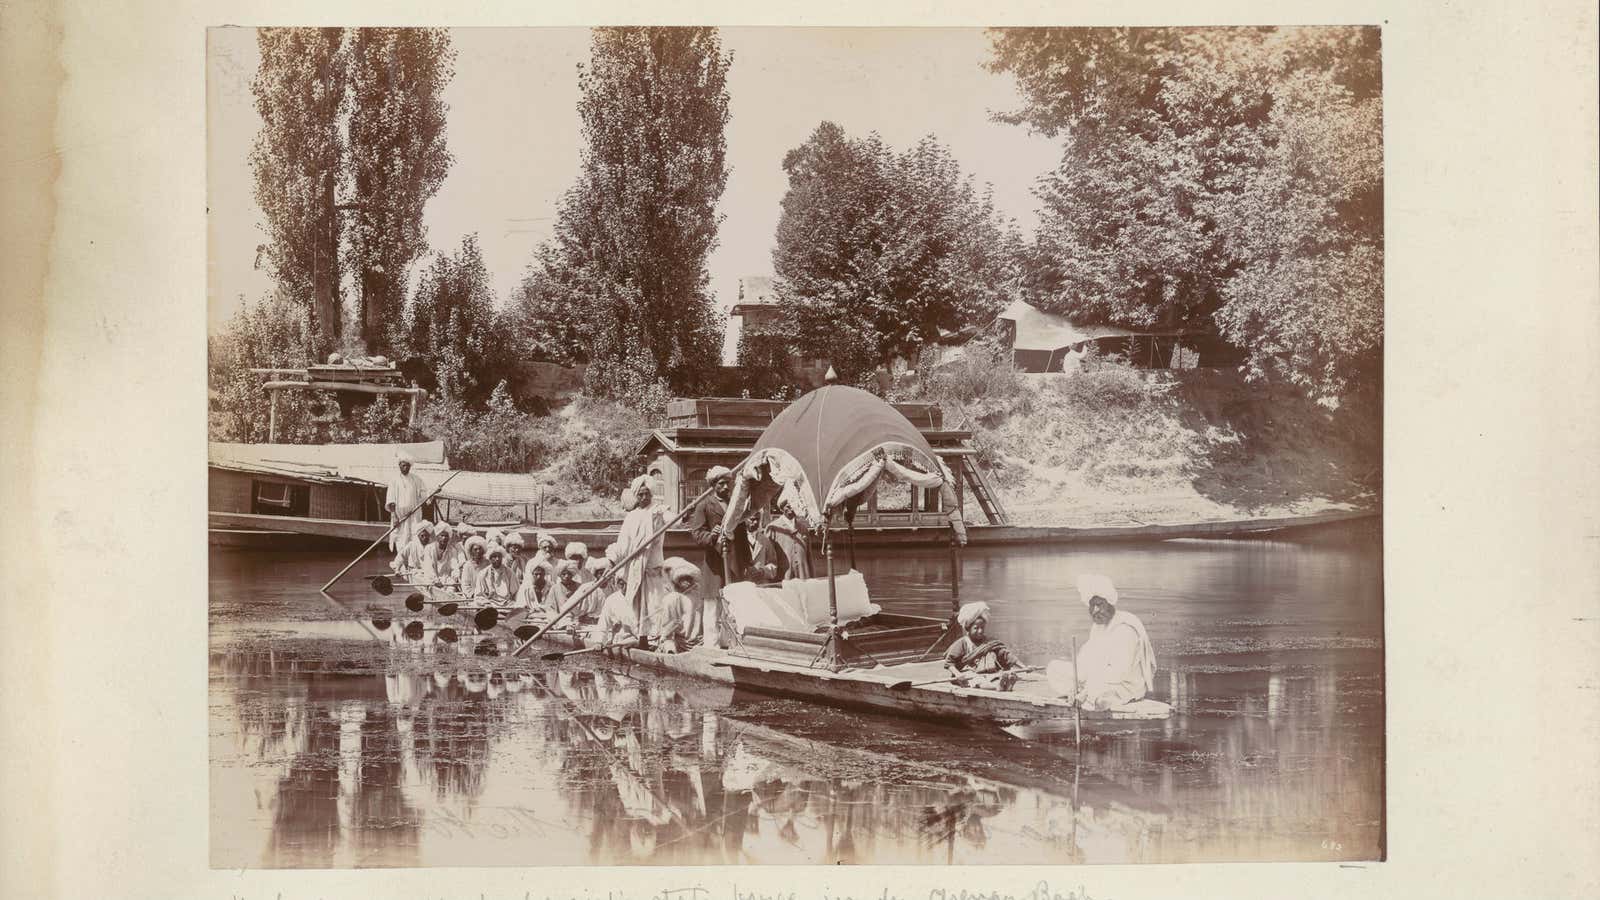 The maharaja’s barge in Srinagar from the Cuthbert Christy album of India.